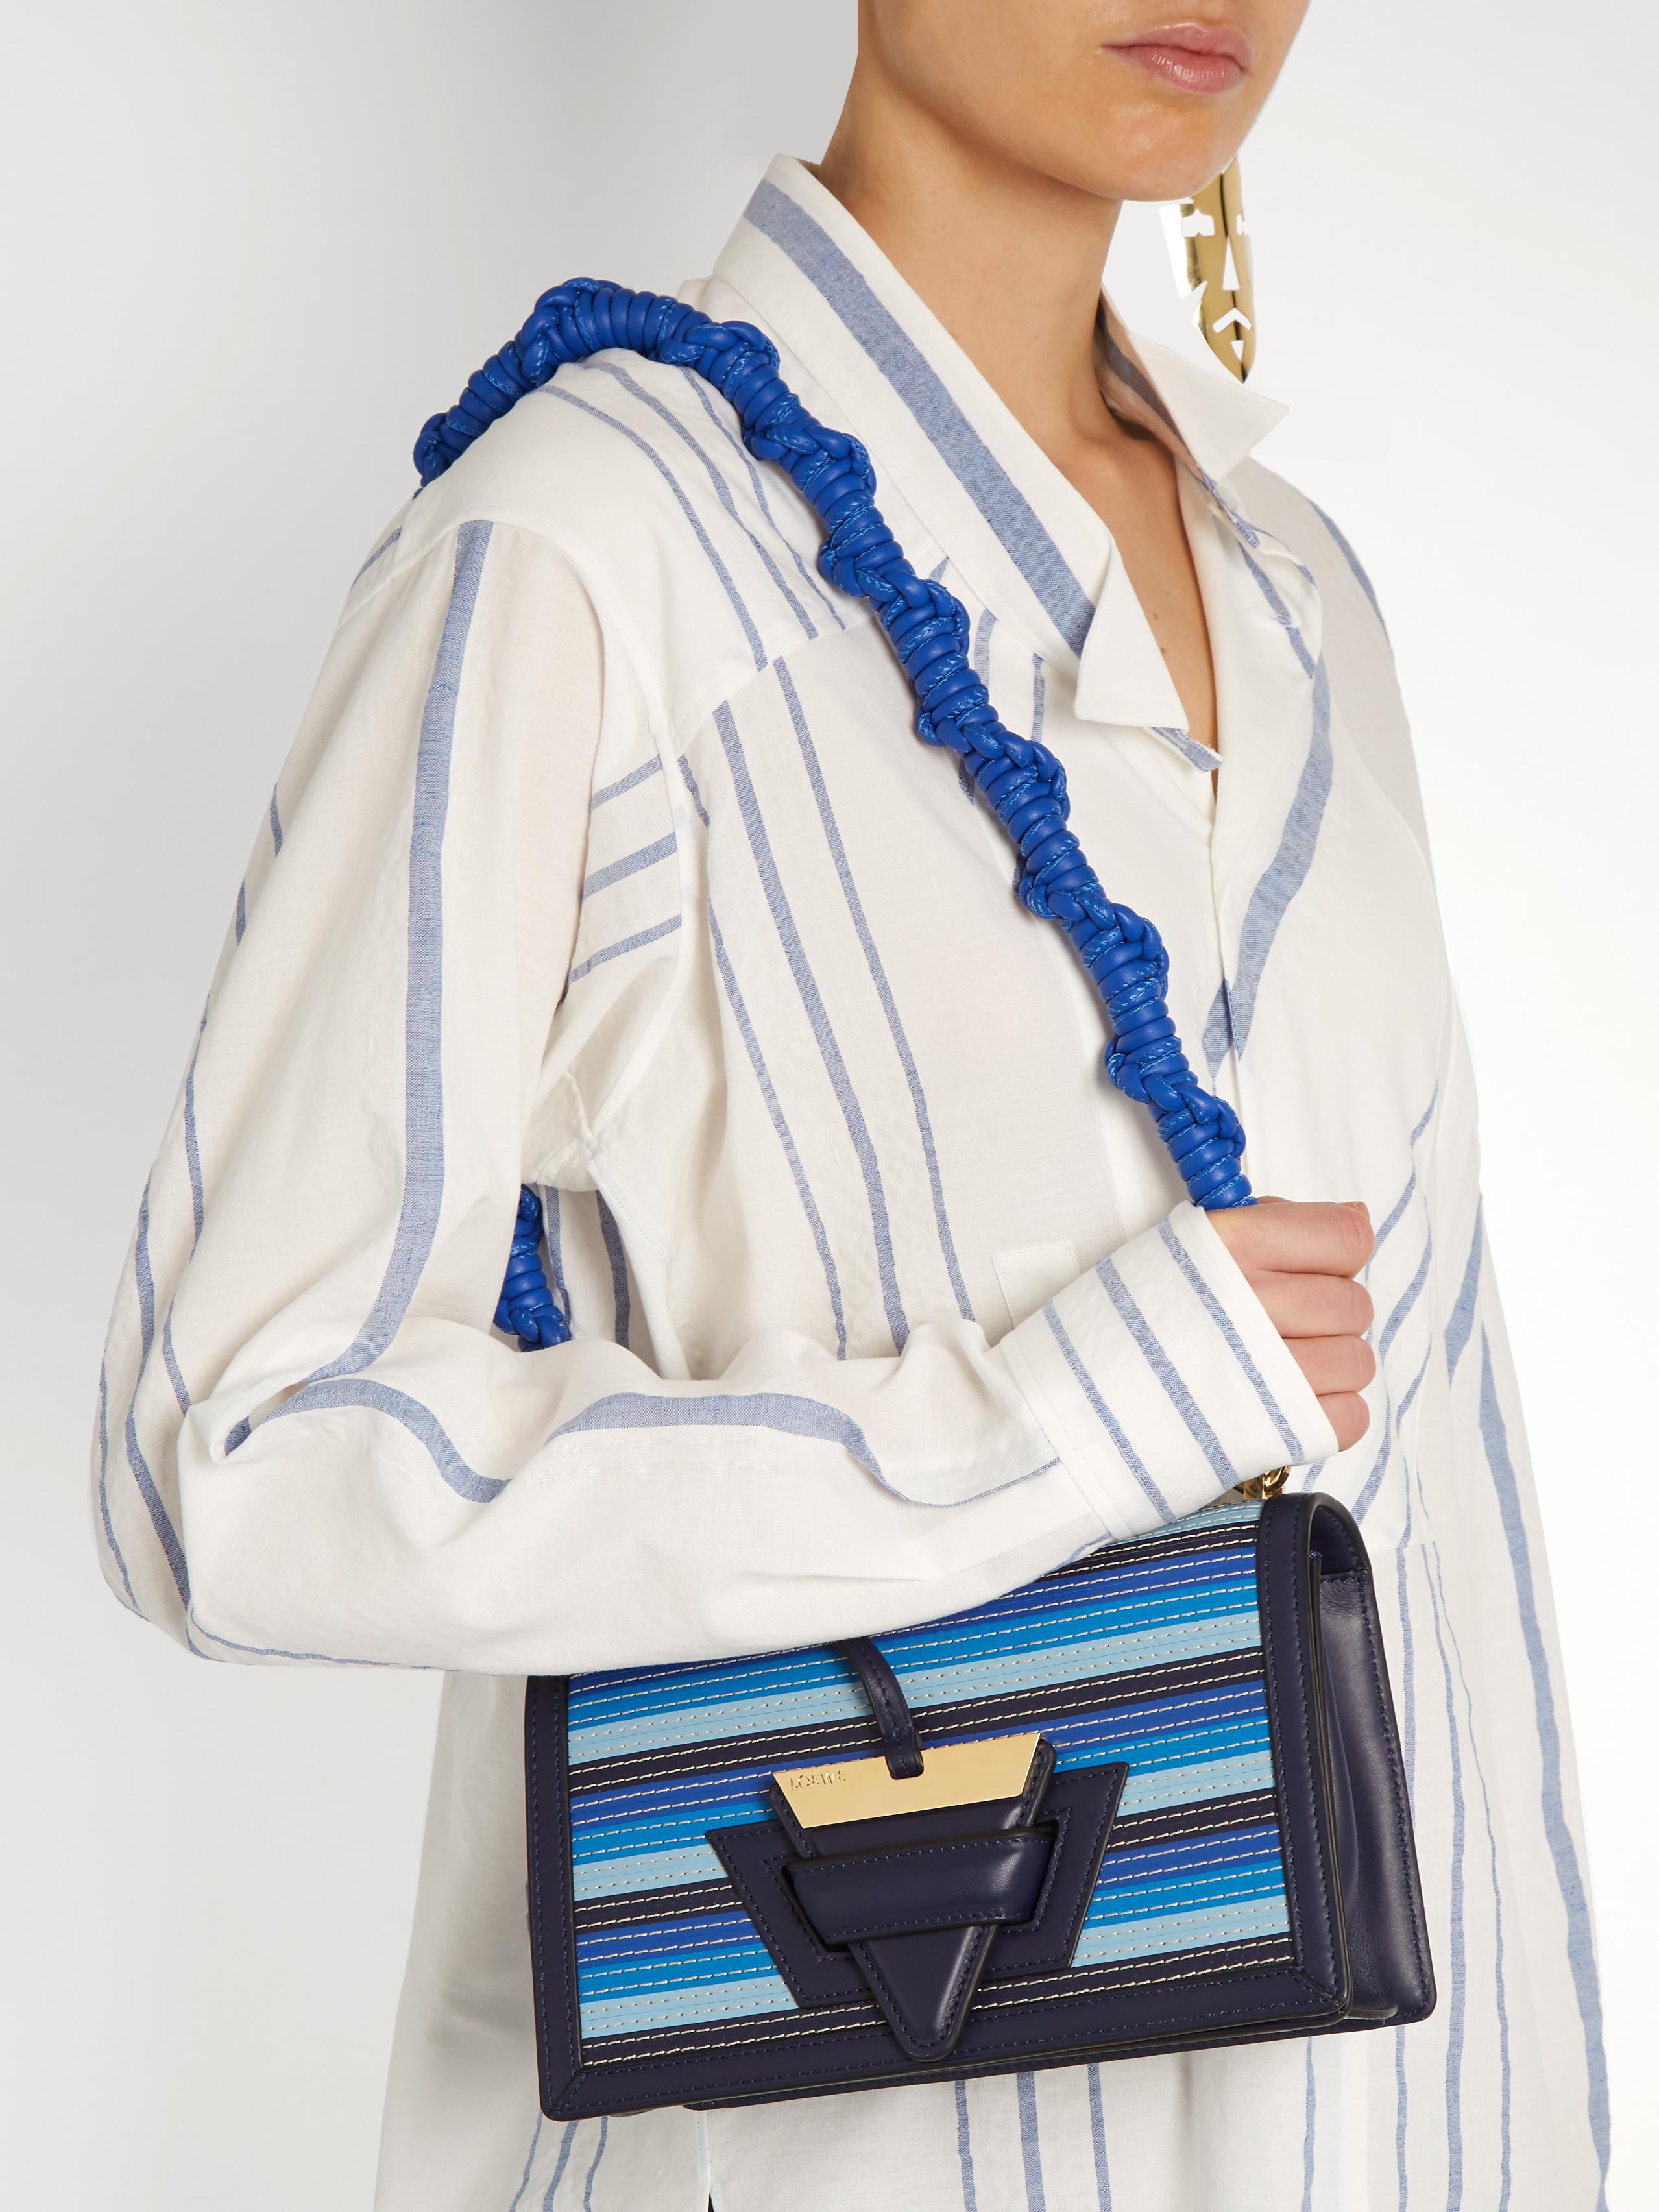 Lyst - Loewe Braided Leather Bag Strap in Blue